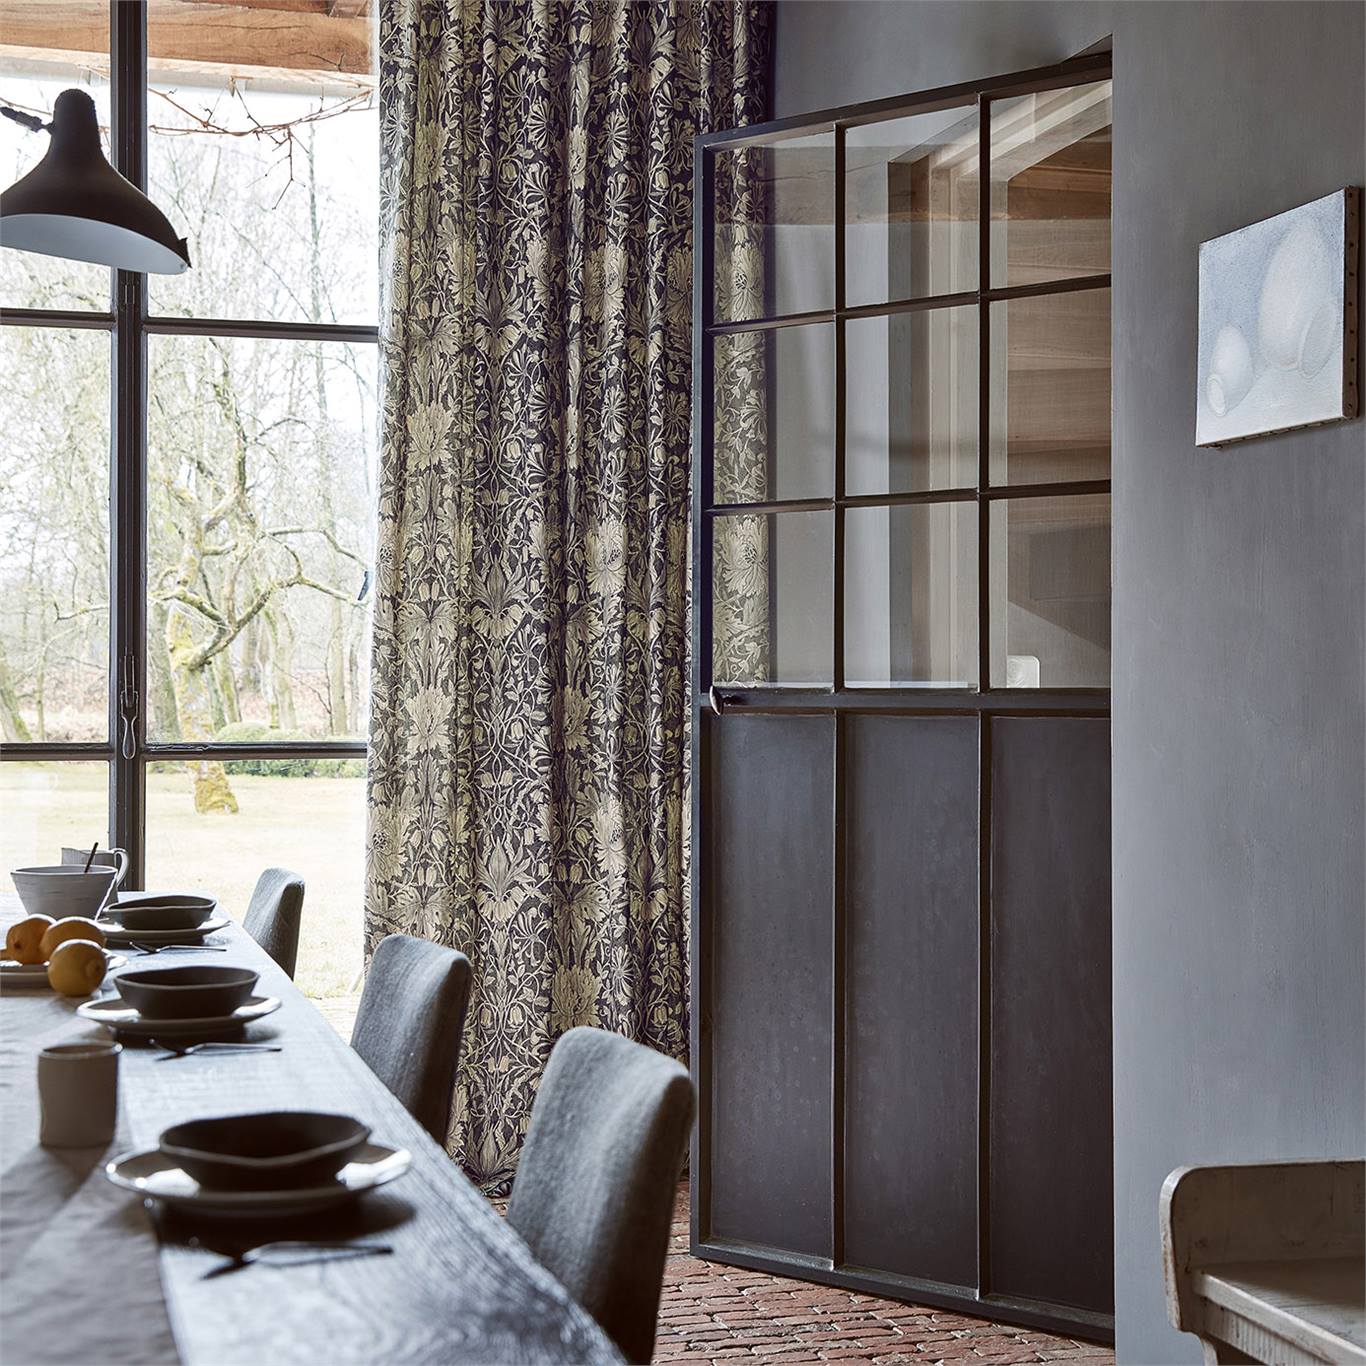 a darker fabric design made in to curtains, framing crittall style windows